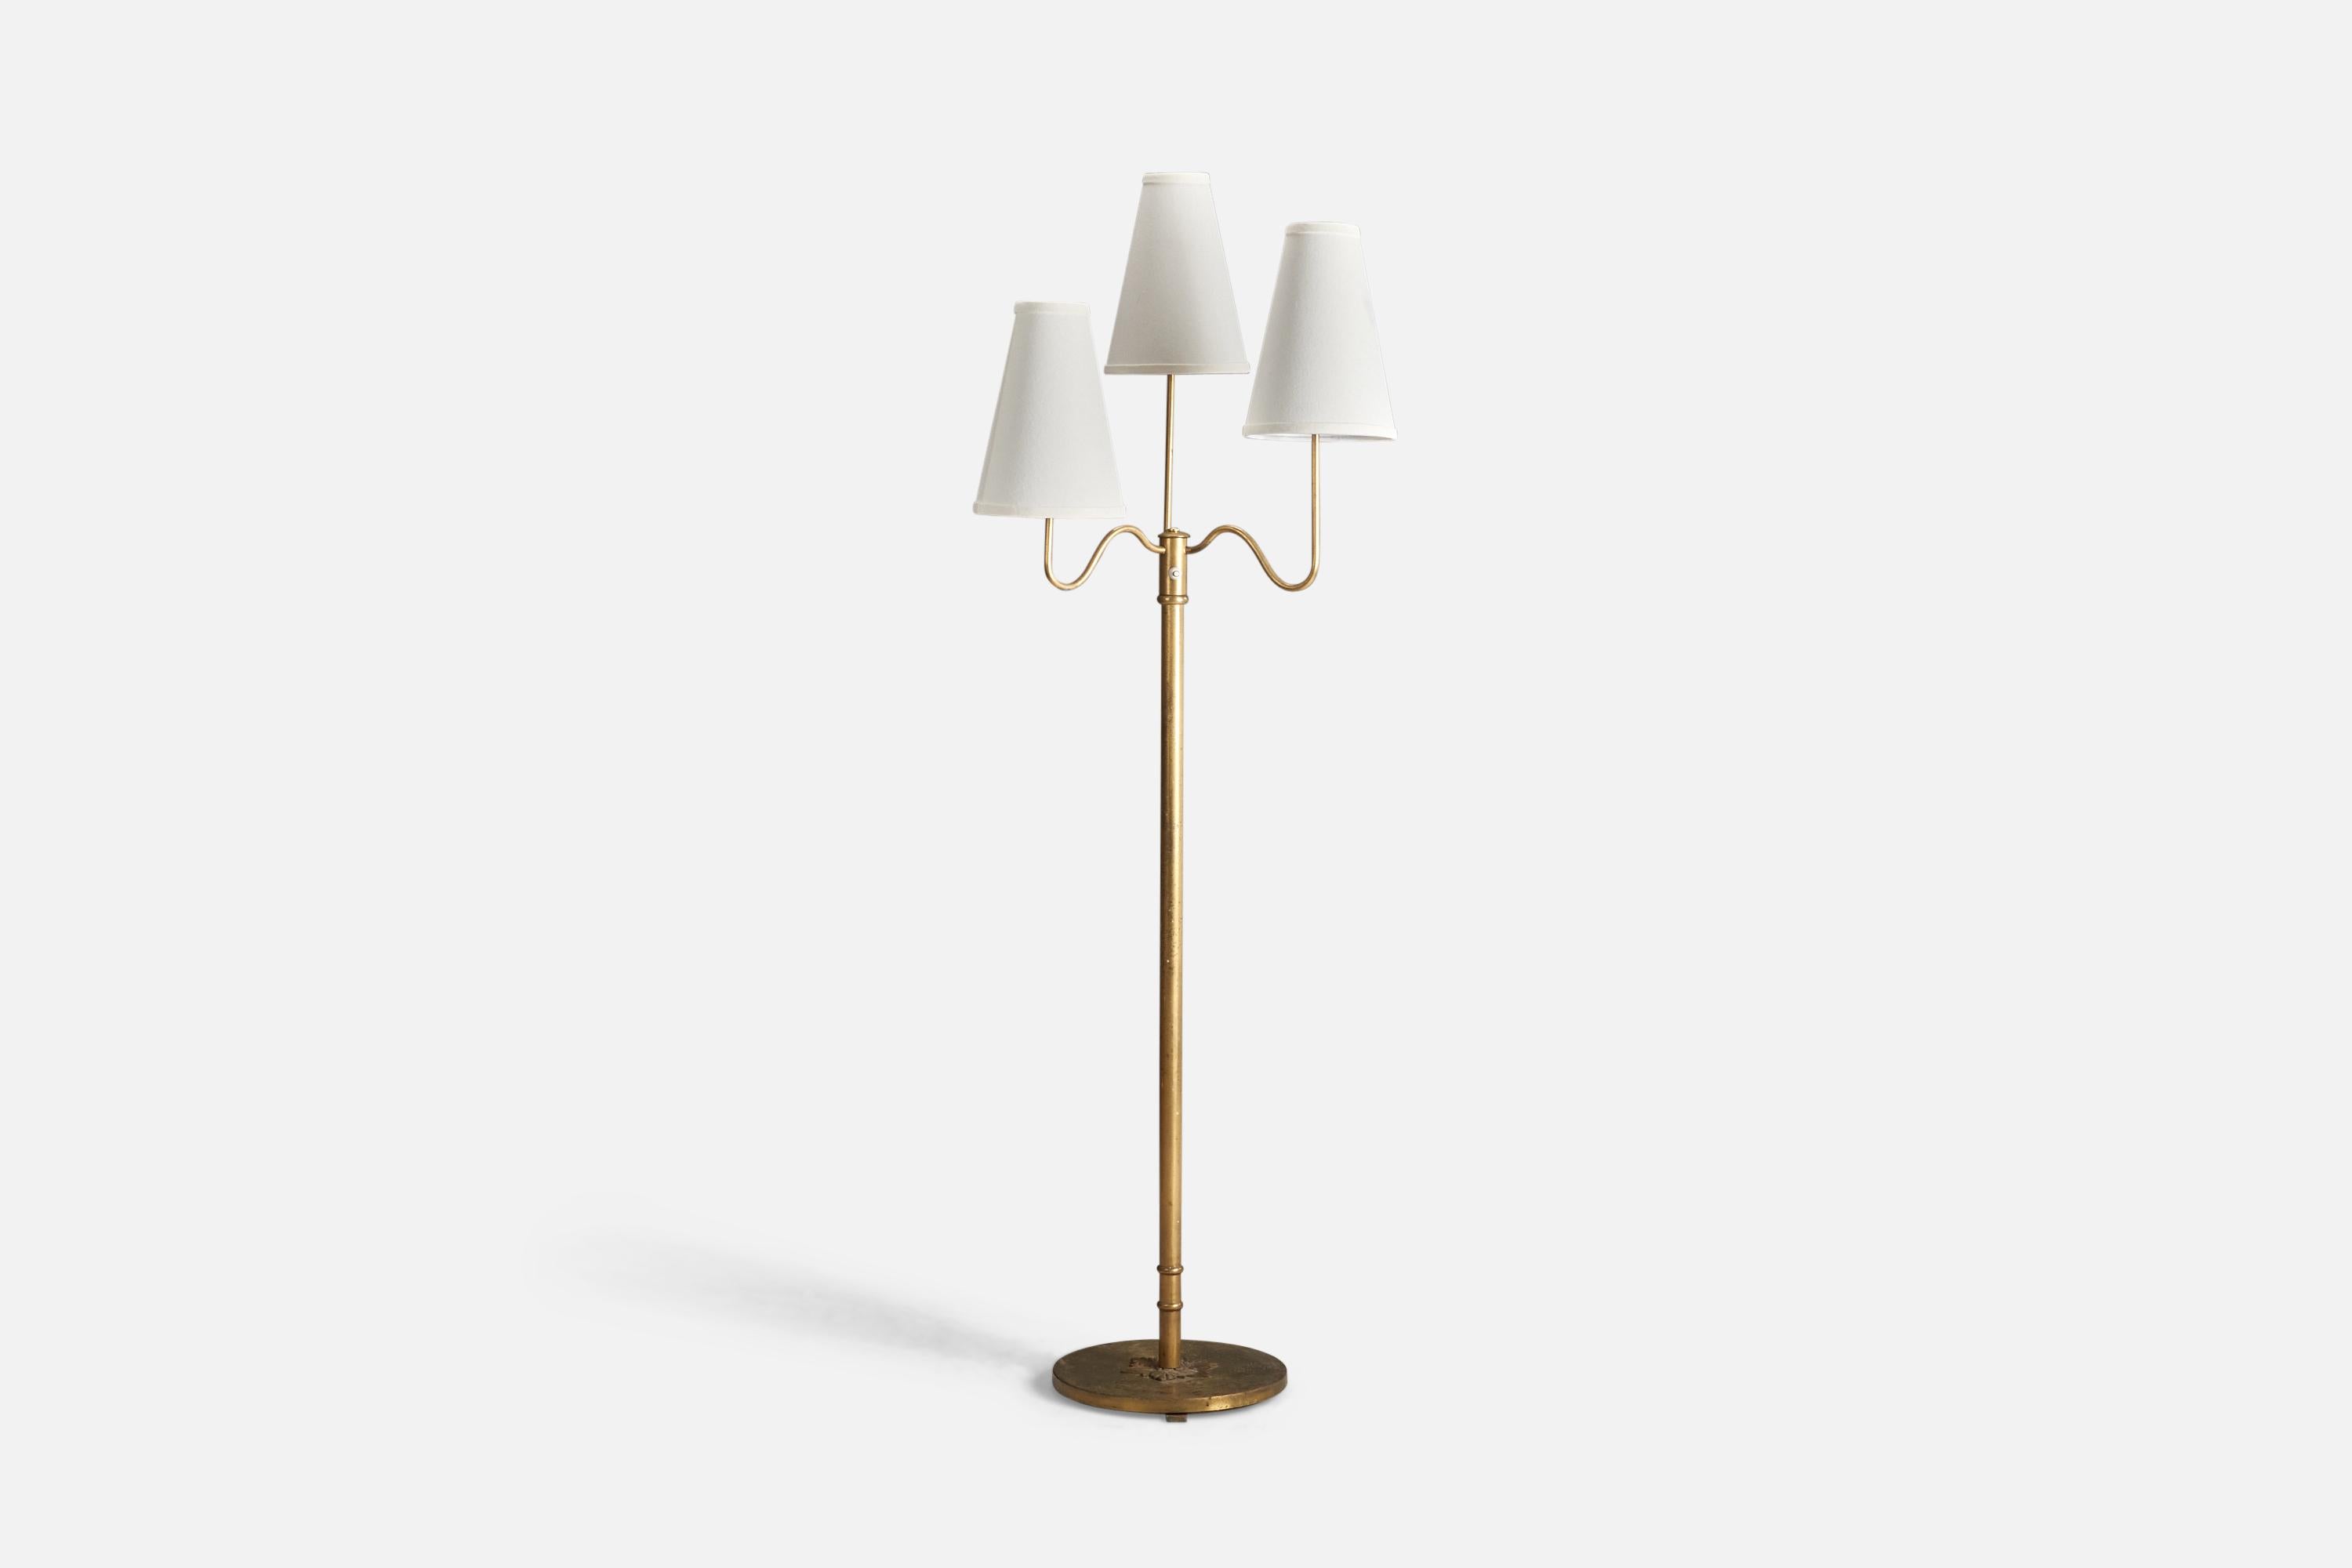 A brass and fabric floor lamp designed and produced by a Swedish Designer, Sweden, 1940s.

Sockets take standard E-26 medium base bulbs.

There is no maximum wattage stated on the fixture.